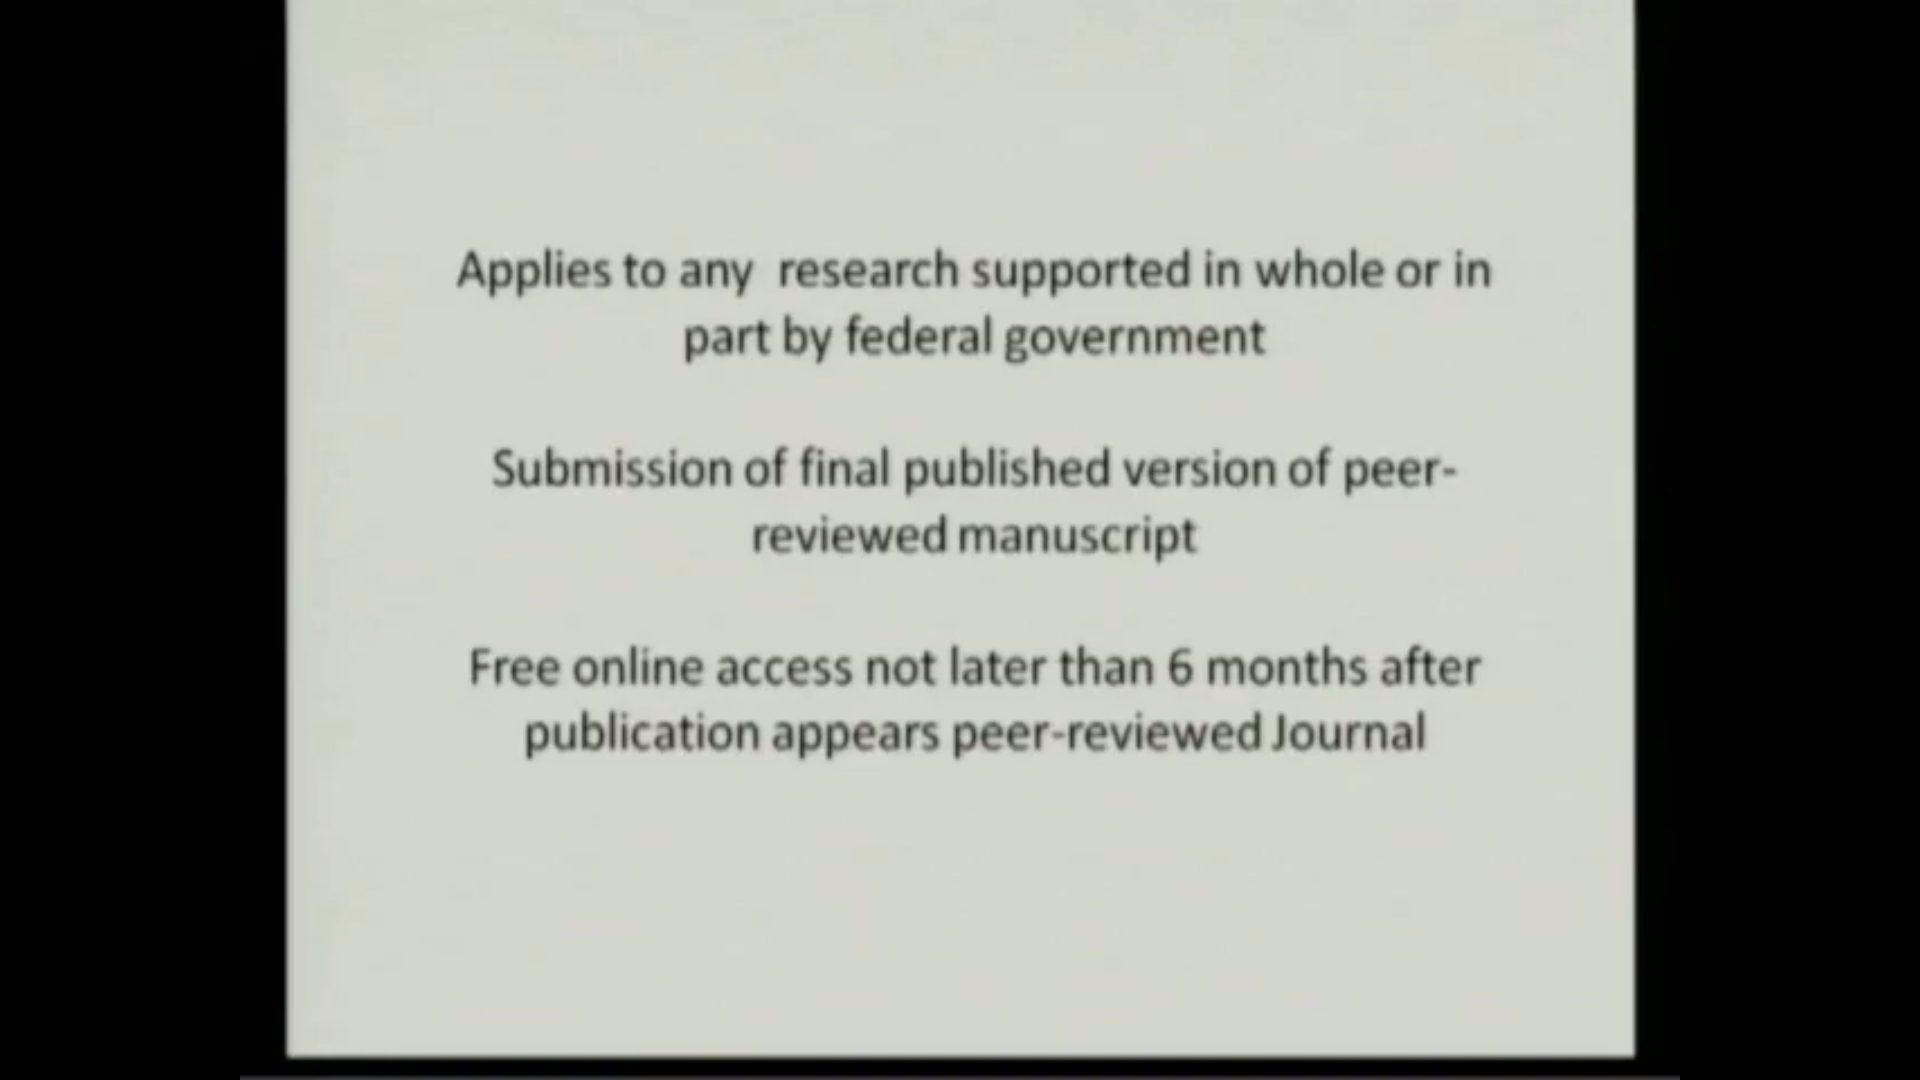 Workshop on Mathematical Journals, lec. 4 - Policymakers and Open Access Thumbnail